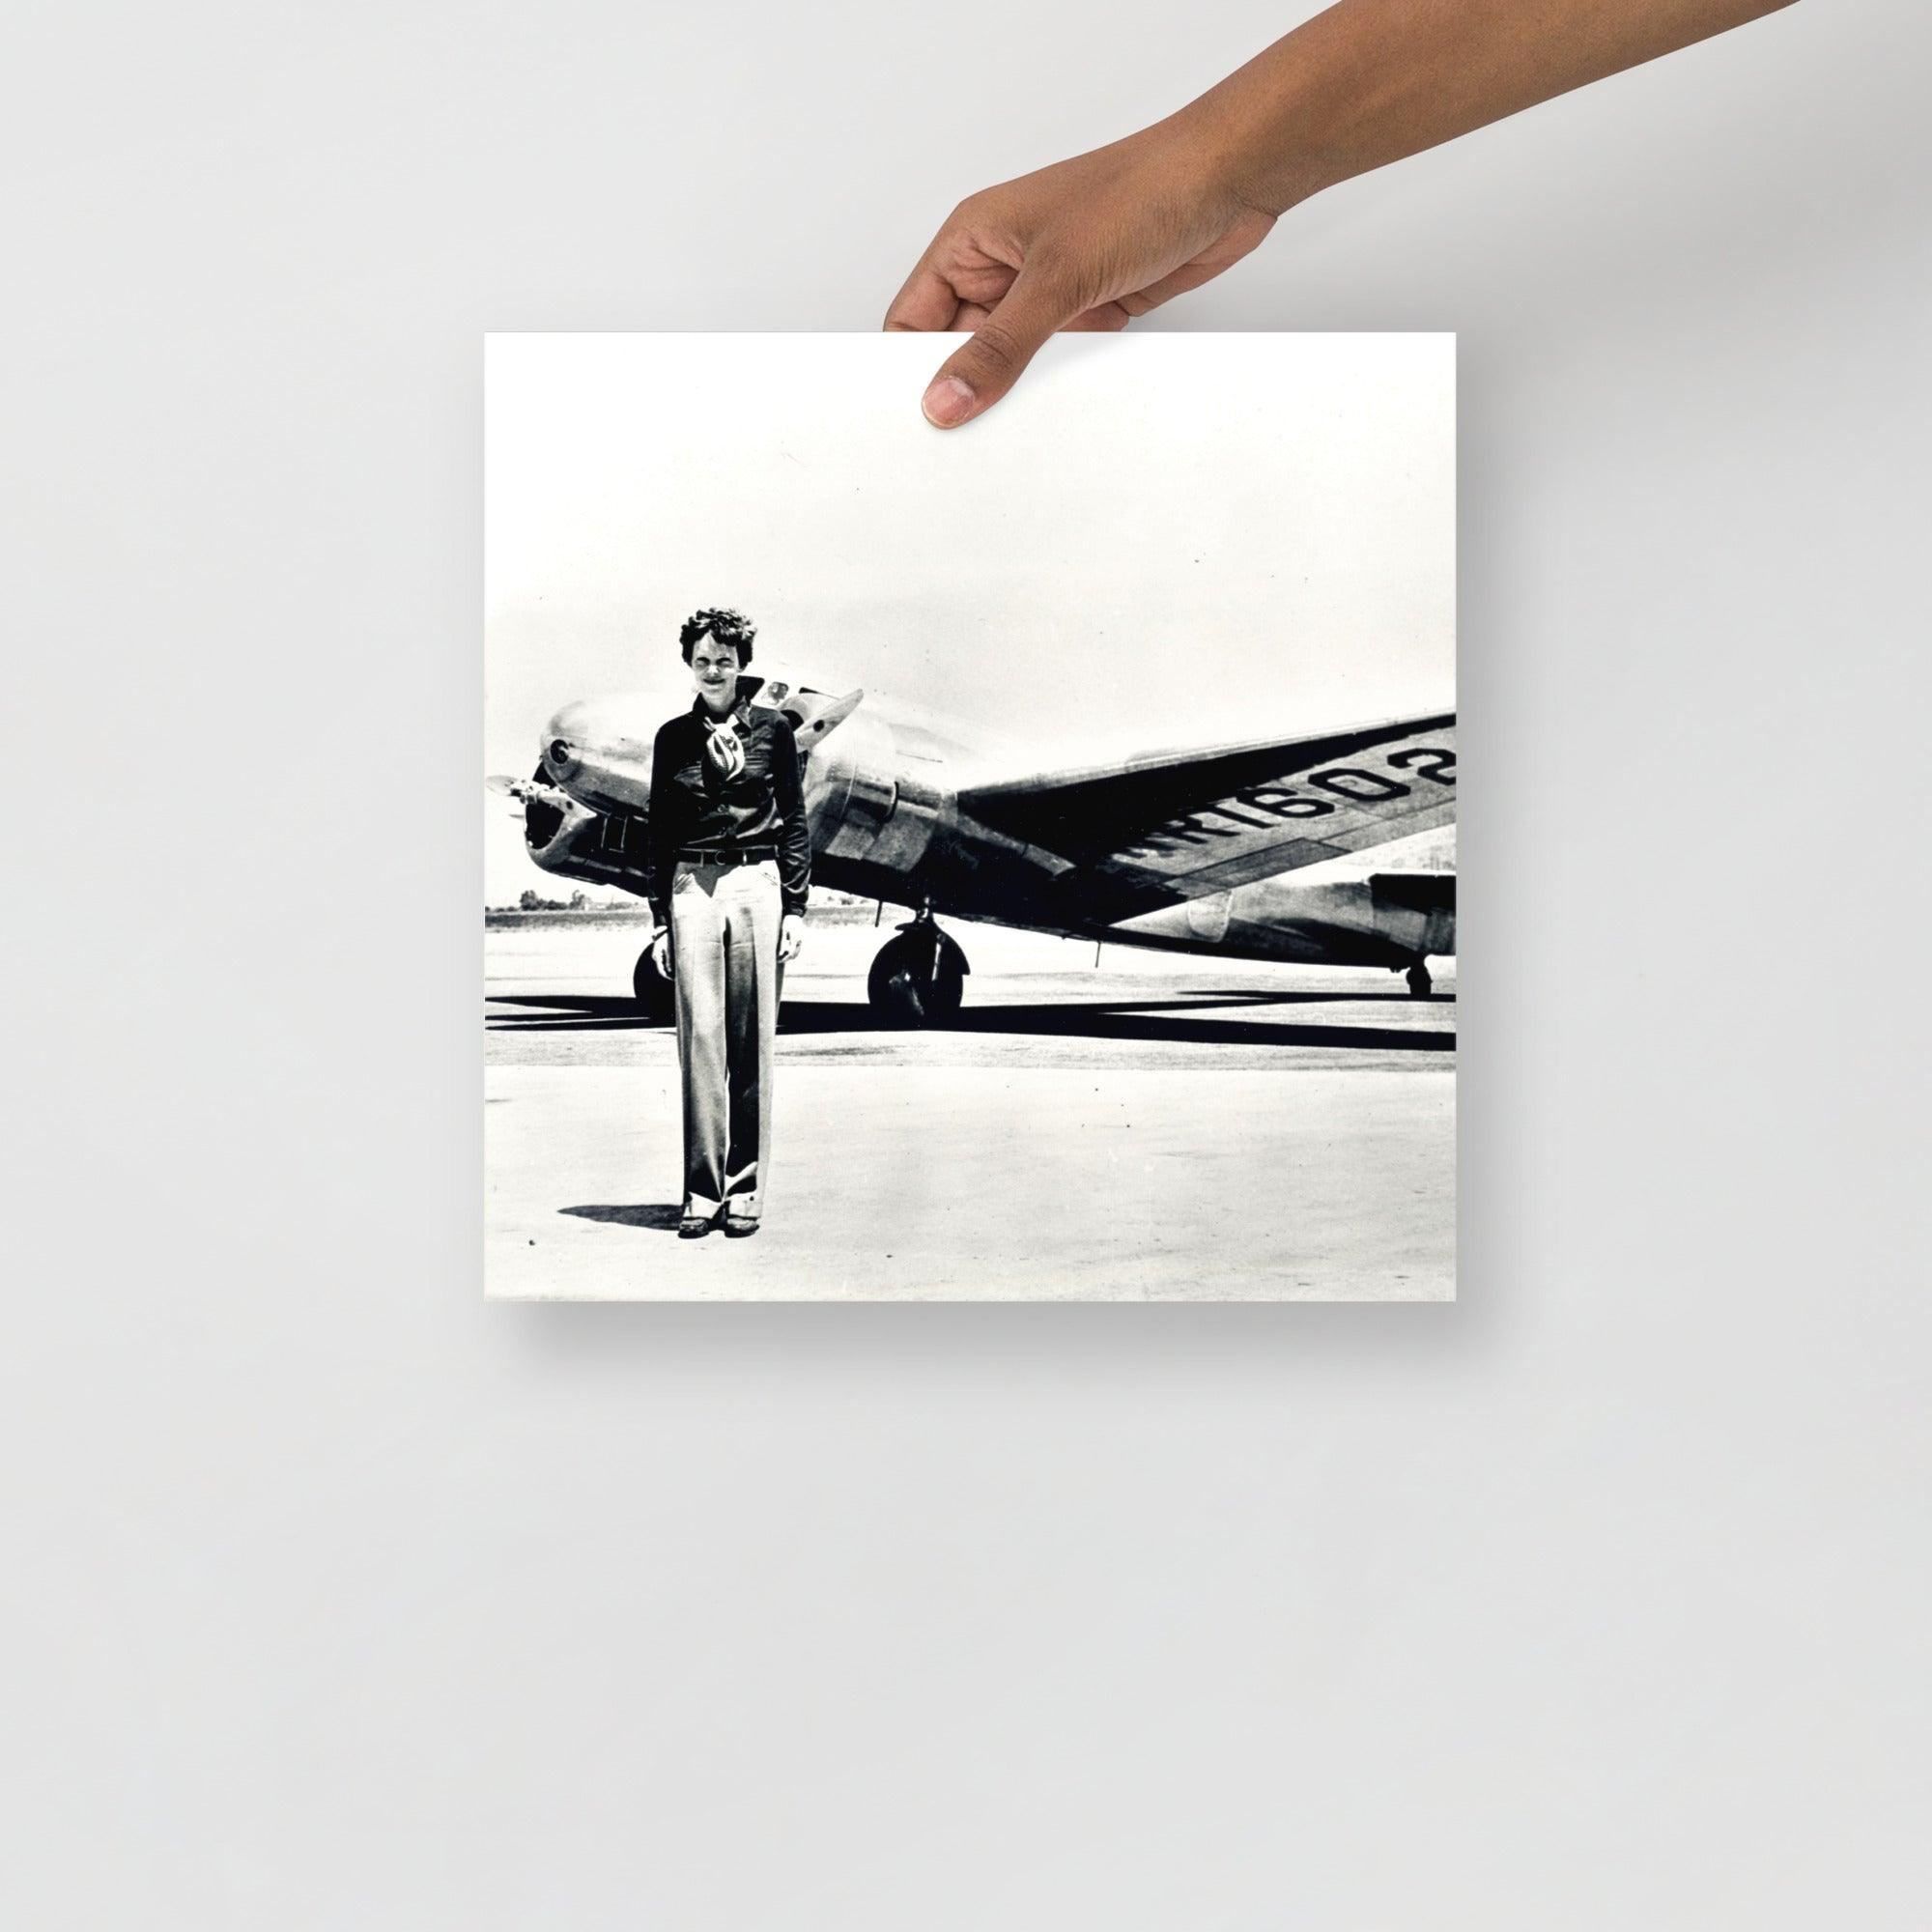 An Amelia Earhart standing in front of the Lockheed Electra on a plain backdrop in size 14x14”.